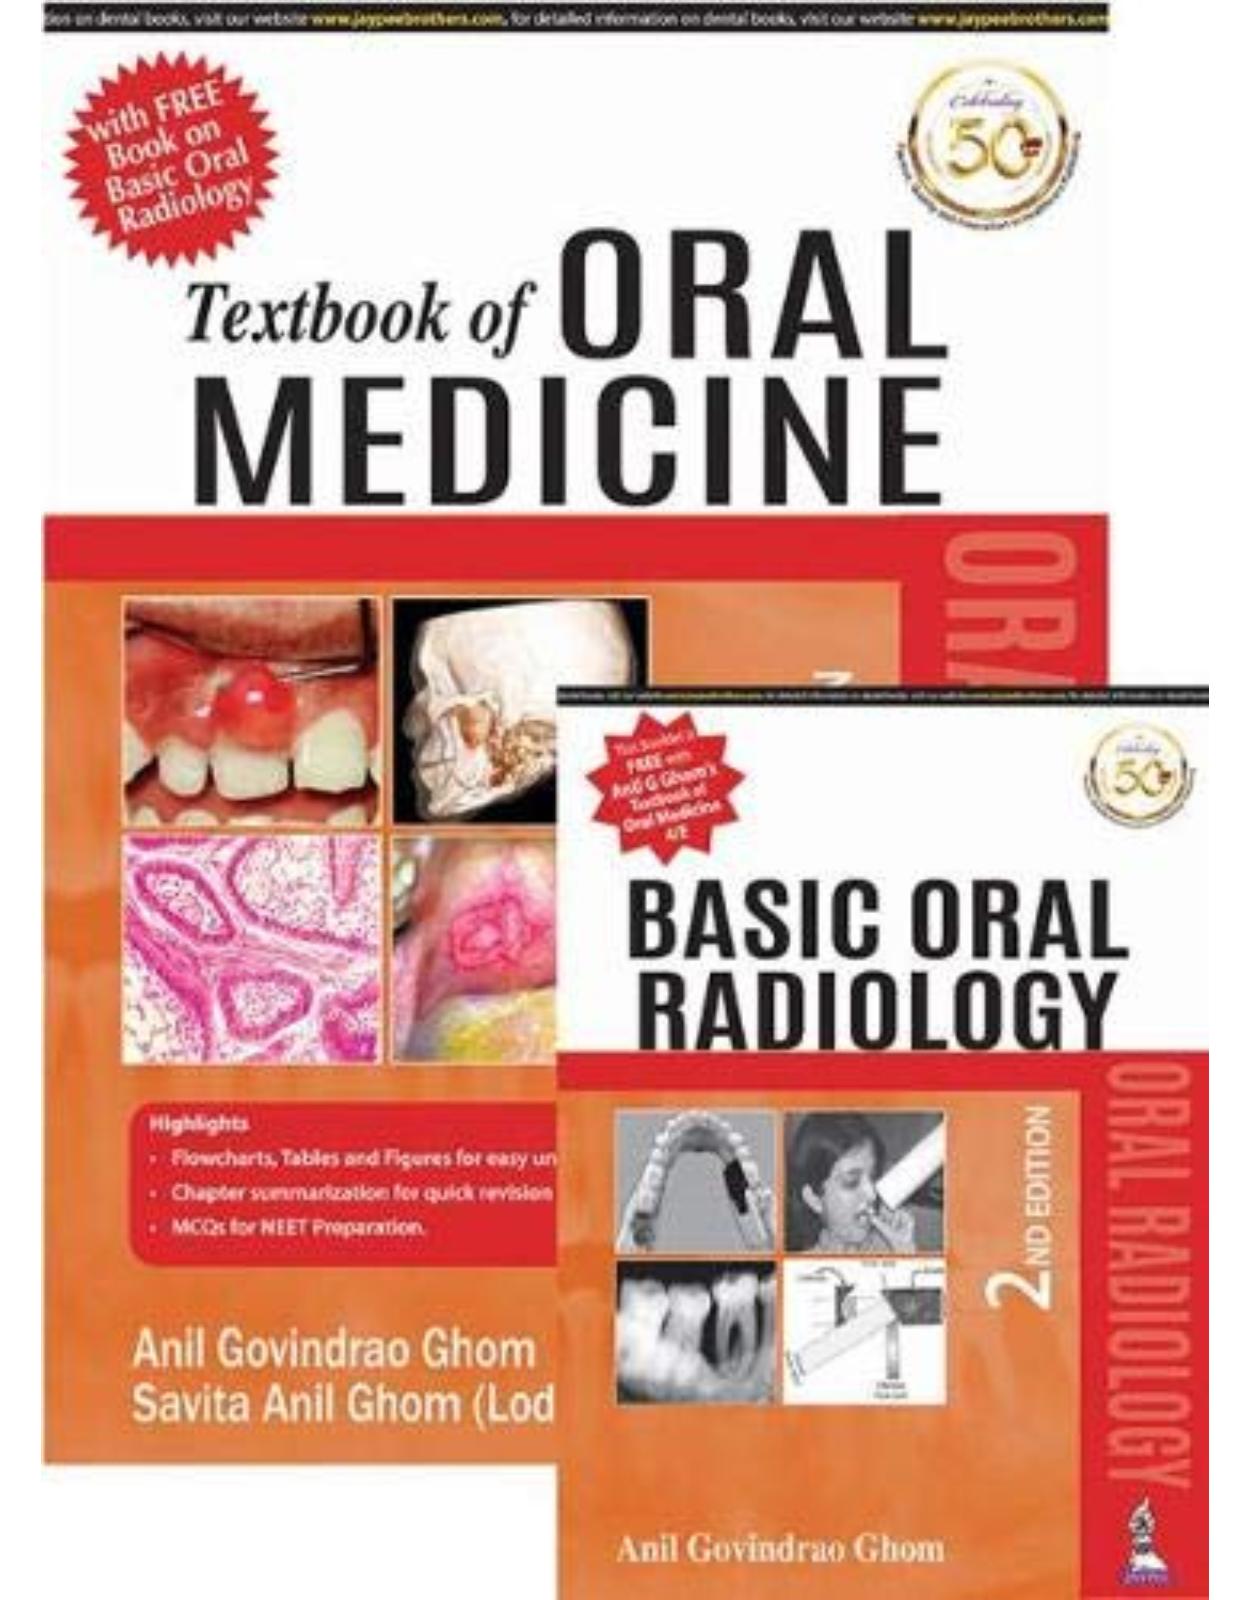 Textbook of Oral Medicine: With Free Book on Basic Oral Radiology 